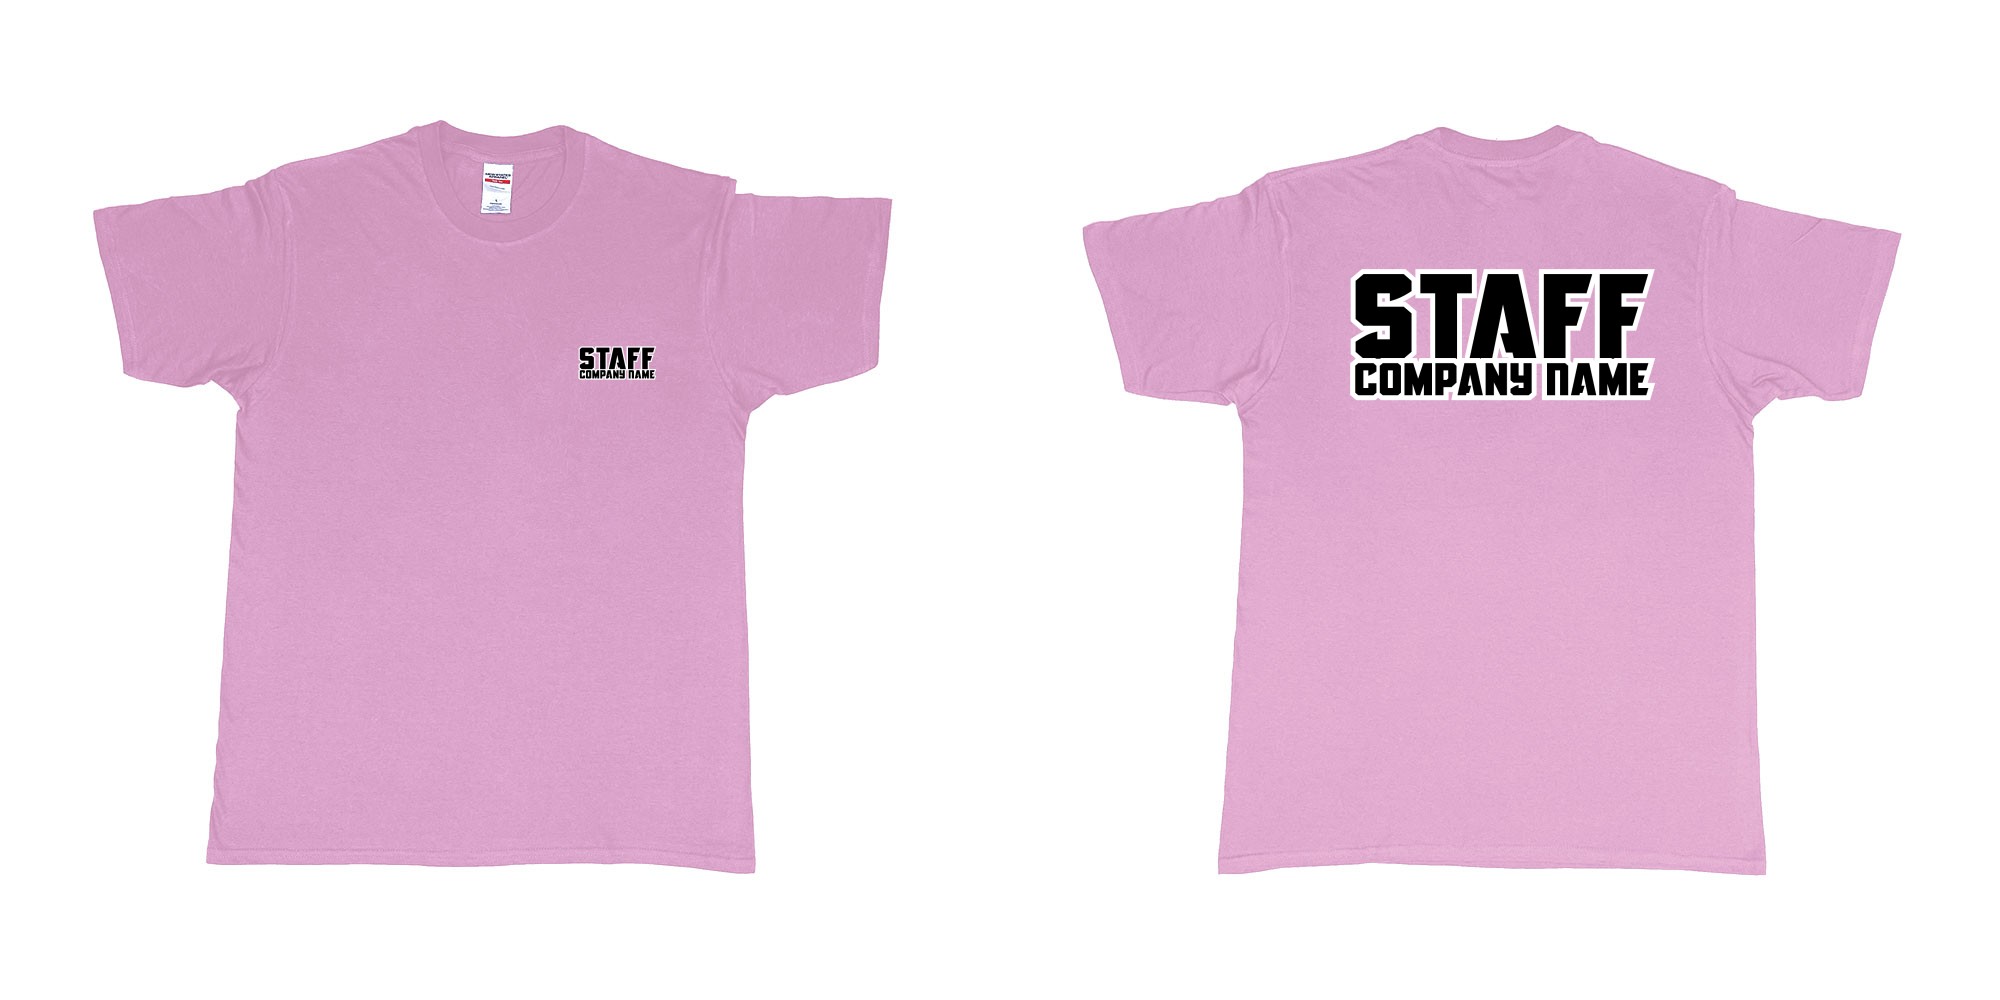 Custom tshirt design staff tshirt own company name in fabric color light-pink choice your own text made in Bali by The Pirate Way